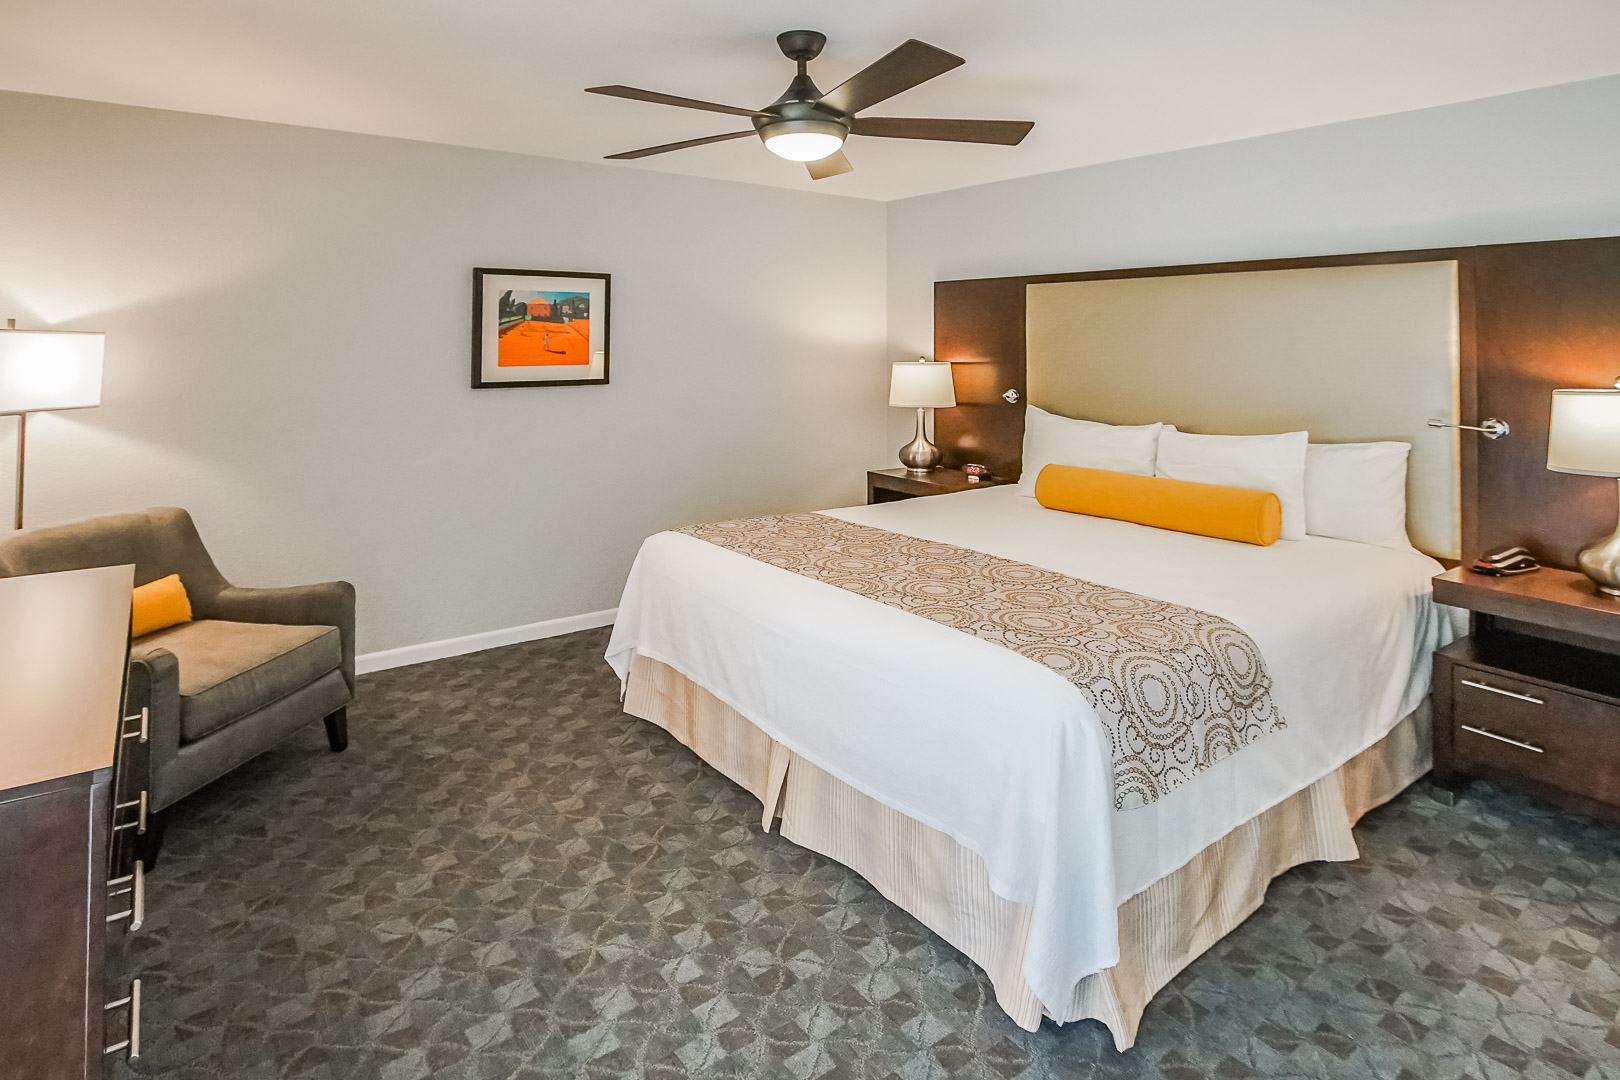 An expansive master bedroom with a king size bed at VRI's Palm Springs Tennis Club in California.